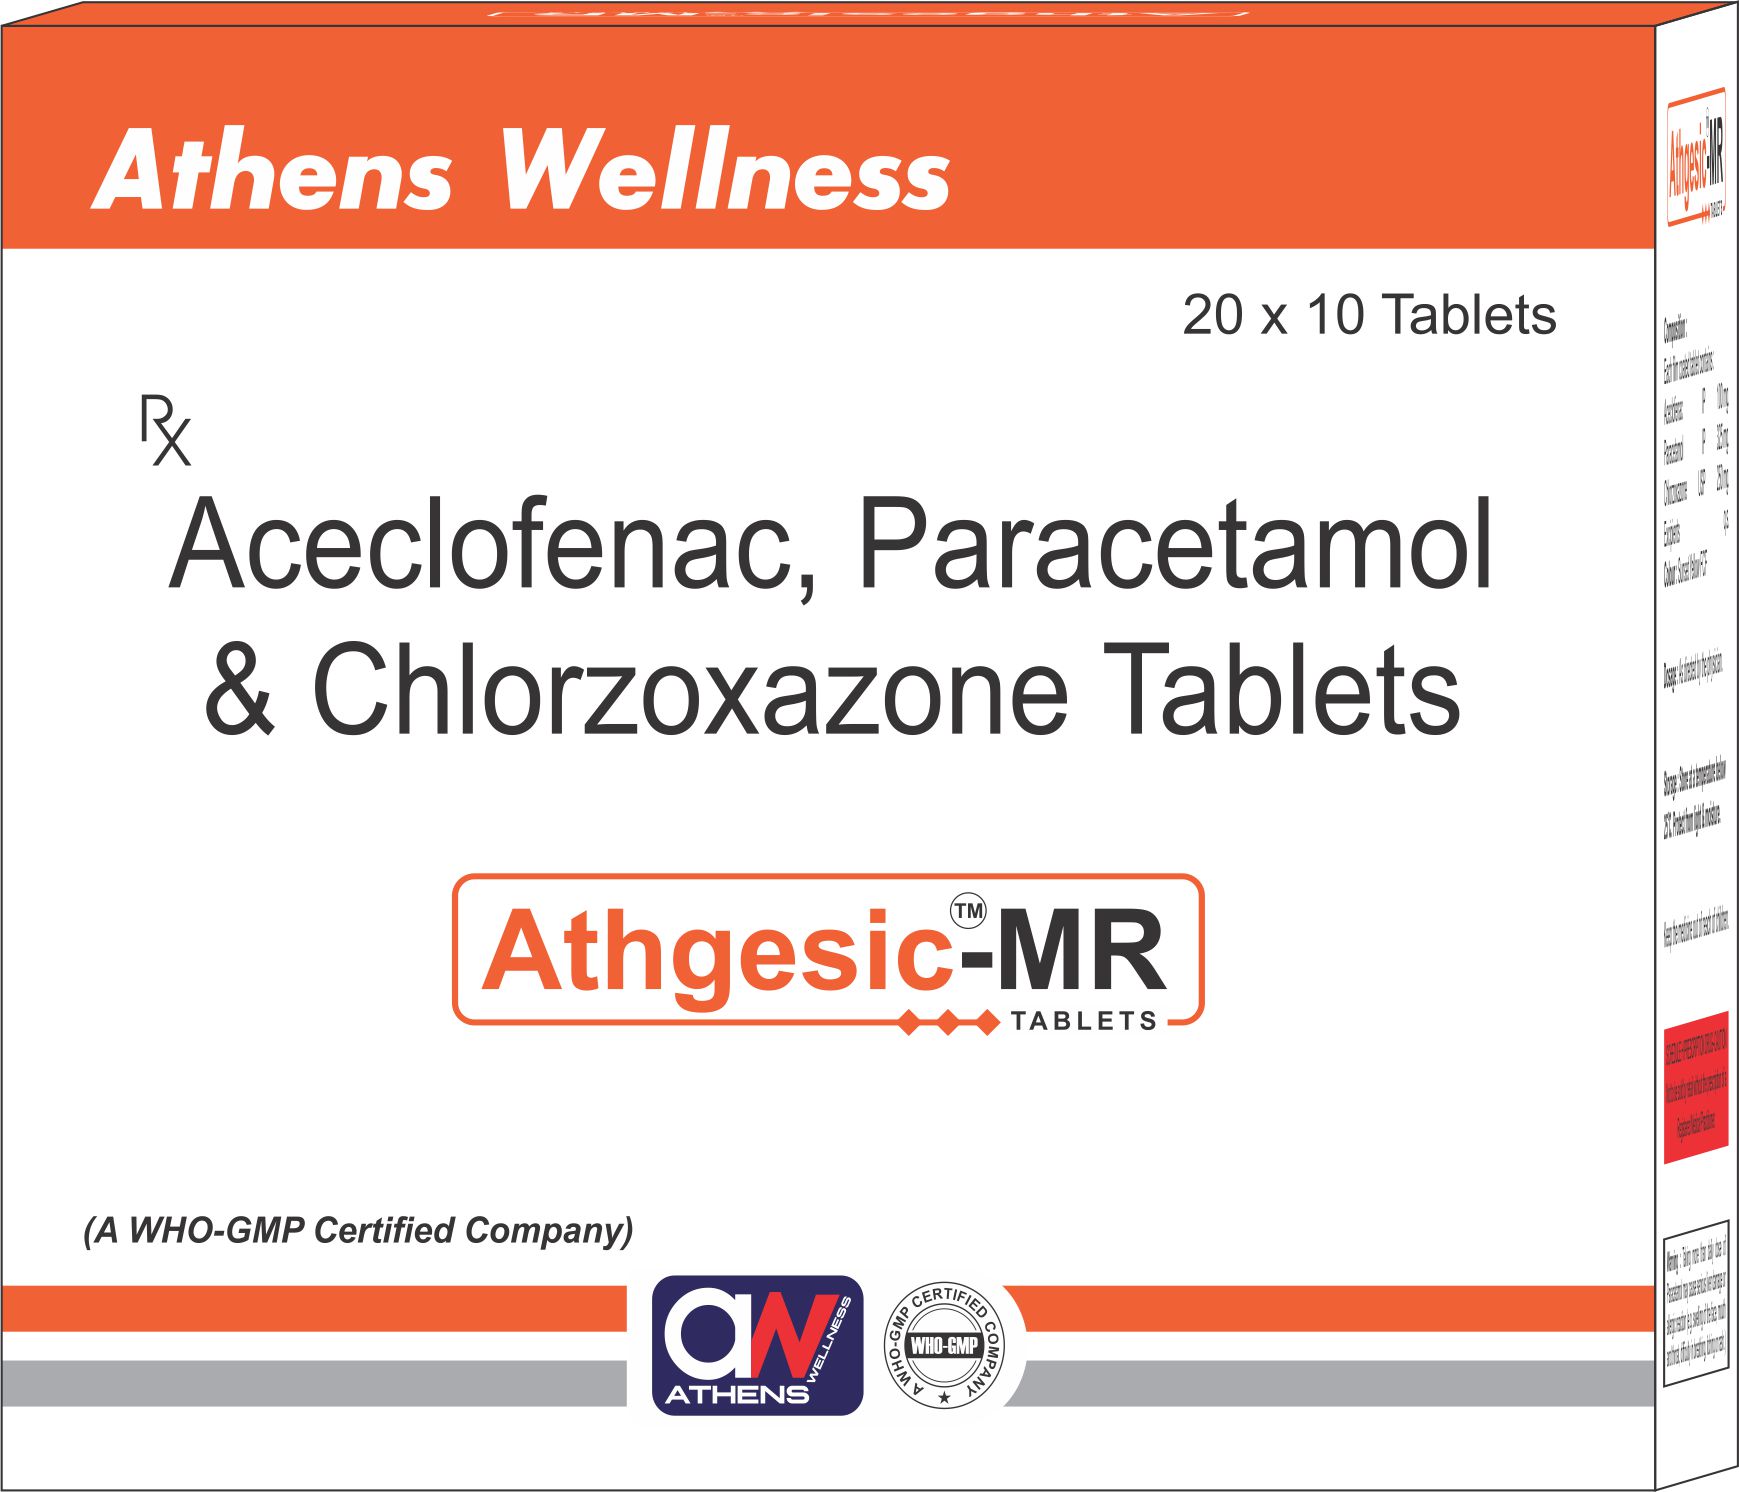 ATHGESIC-MR TABLETS